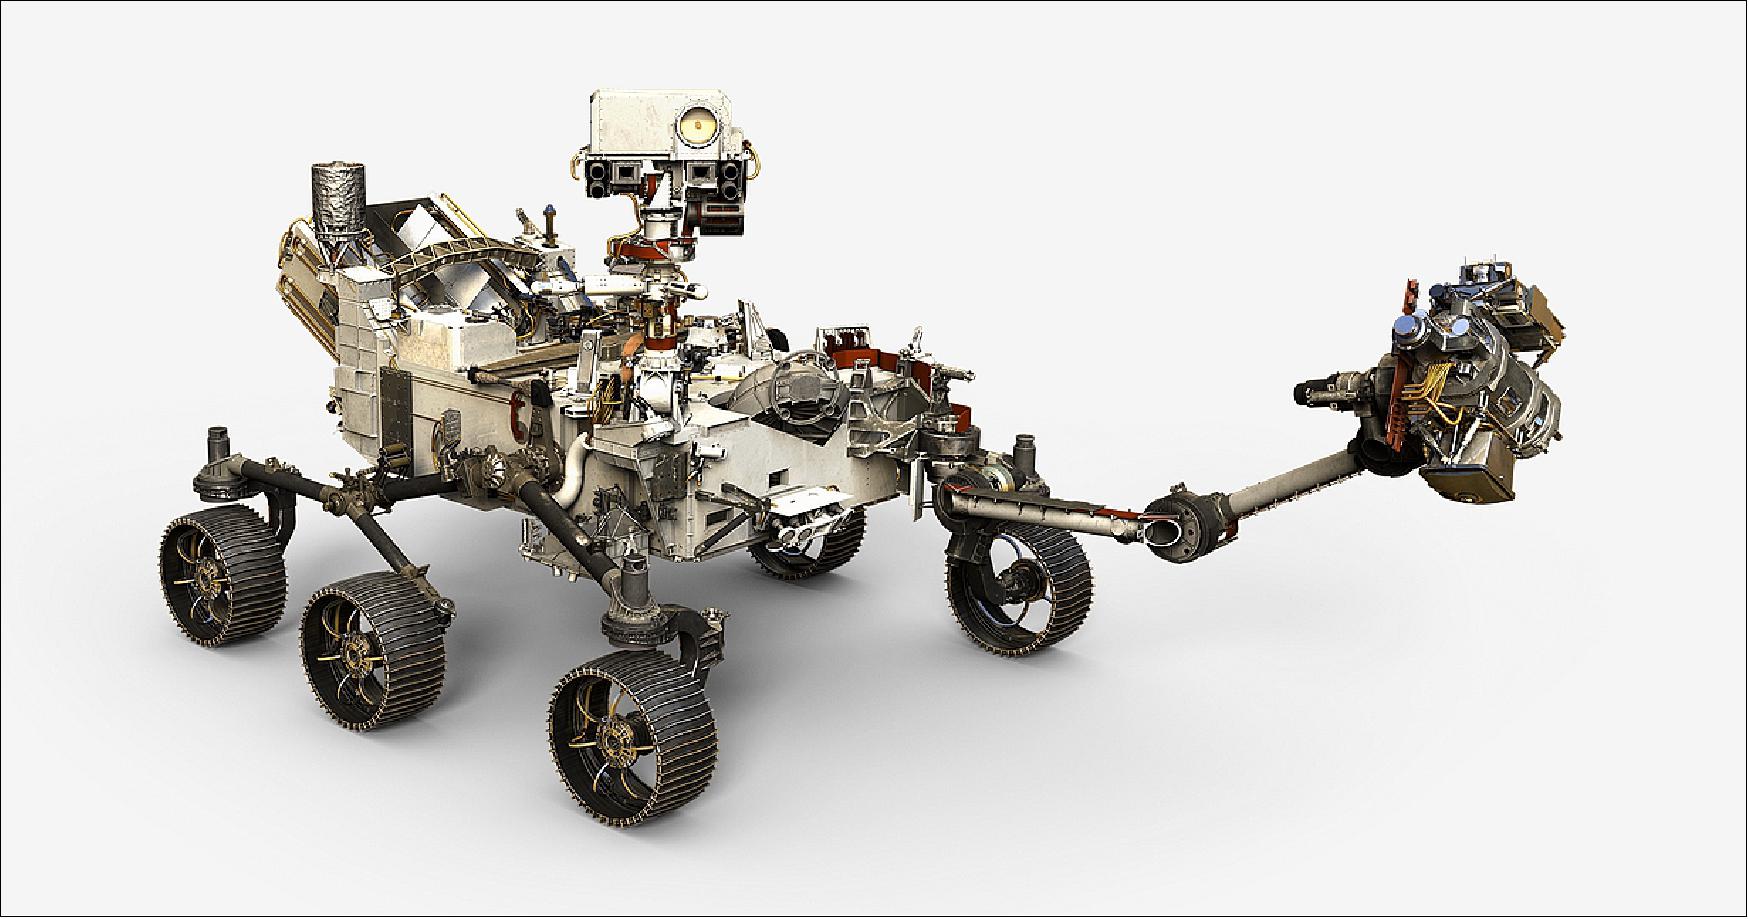 Figure 5: The Mars 2010 rover is a wheeled vehicle with science instruments for making discoveries on the Martian surface (image credit: NASA)